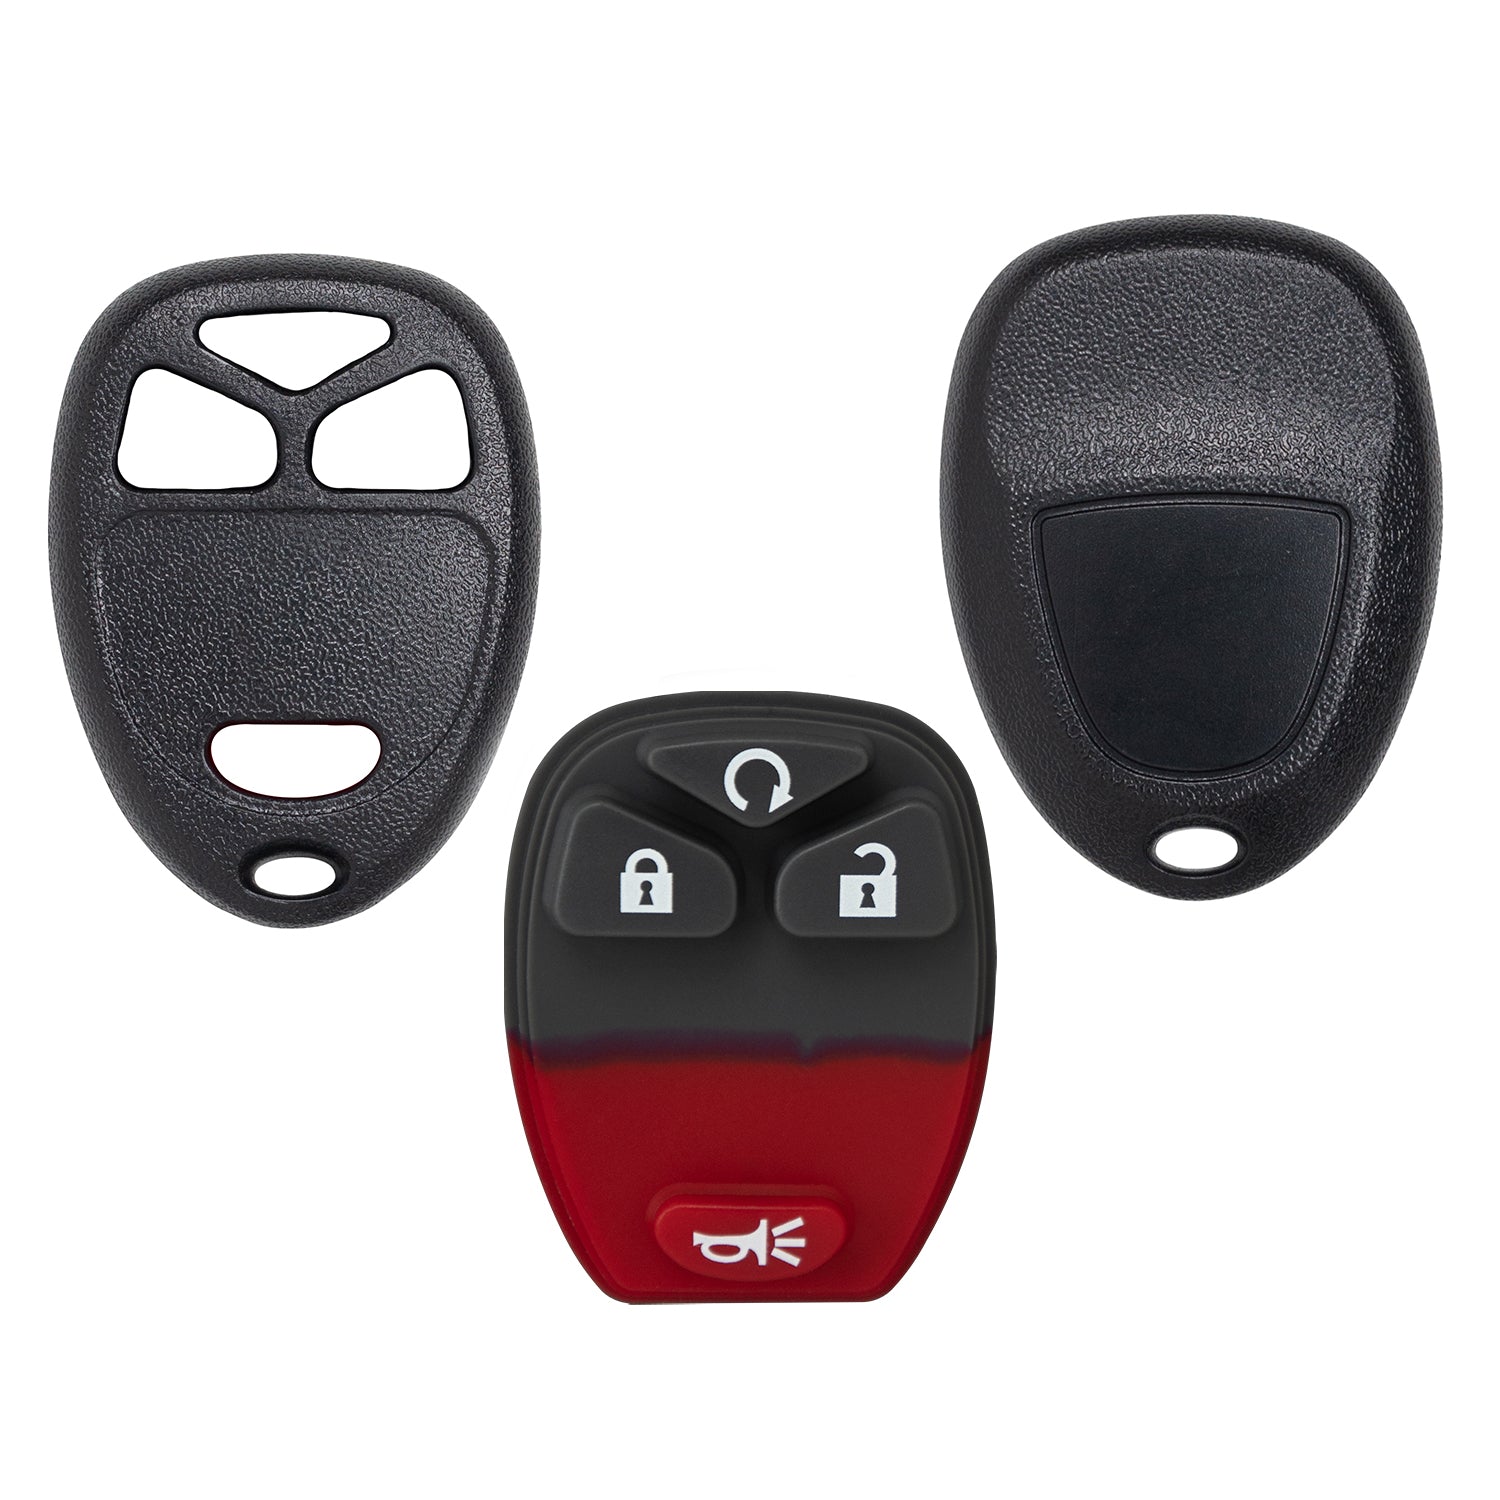 Shell Case Keyless Entry Remote Key Fob Transmitter OUC60270 for Chevrolet Impala Suburban Tahoe Monte Carlo Yukon DTS Lucerne Battery Clip on Back (4 Button Remote Start)